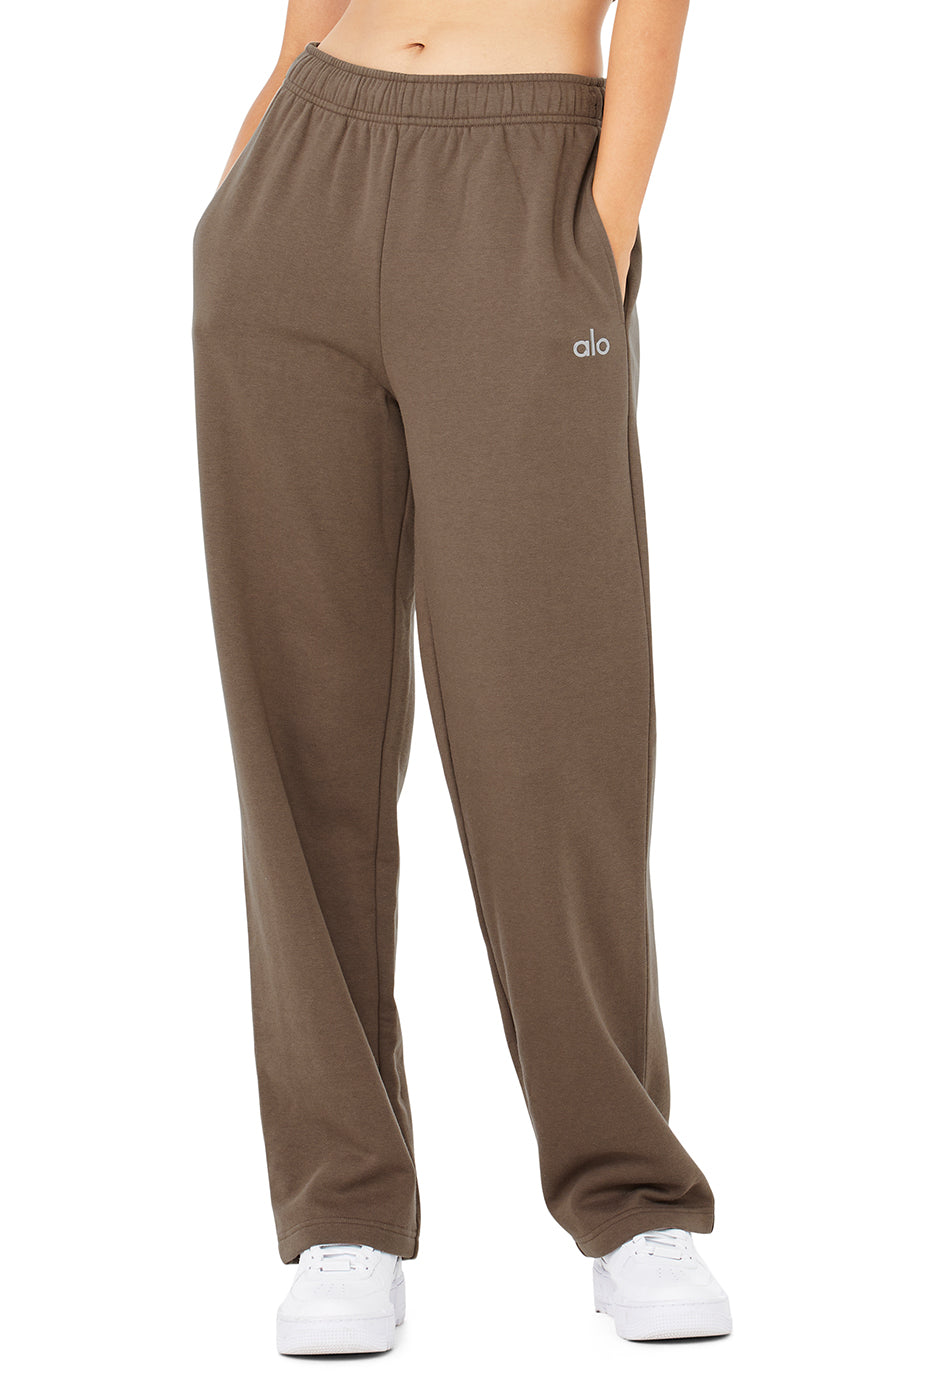 Accolade Straight Leg Sweatpant in Hot Cocoa by Alo Yoga - Work